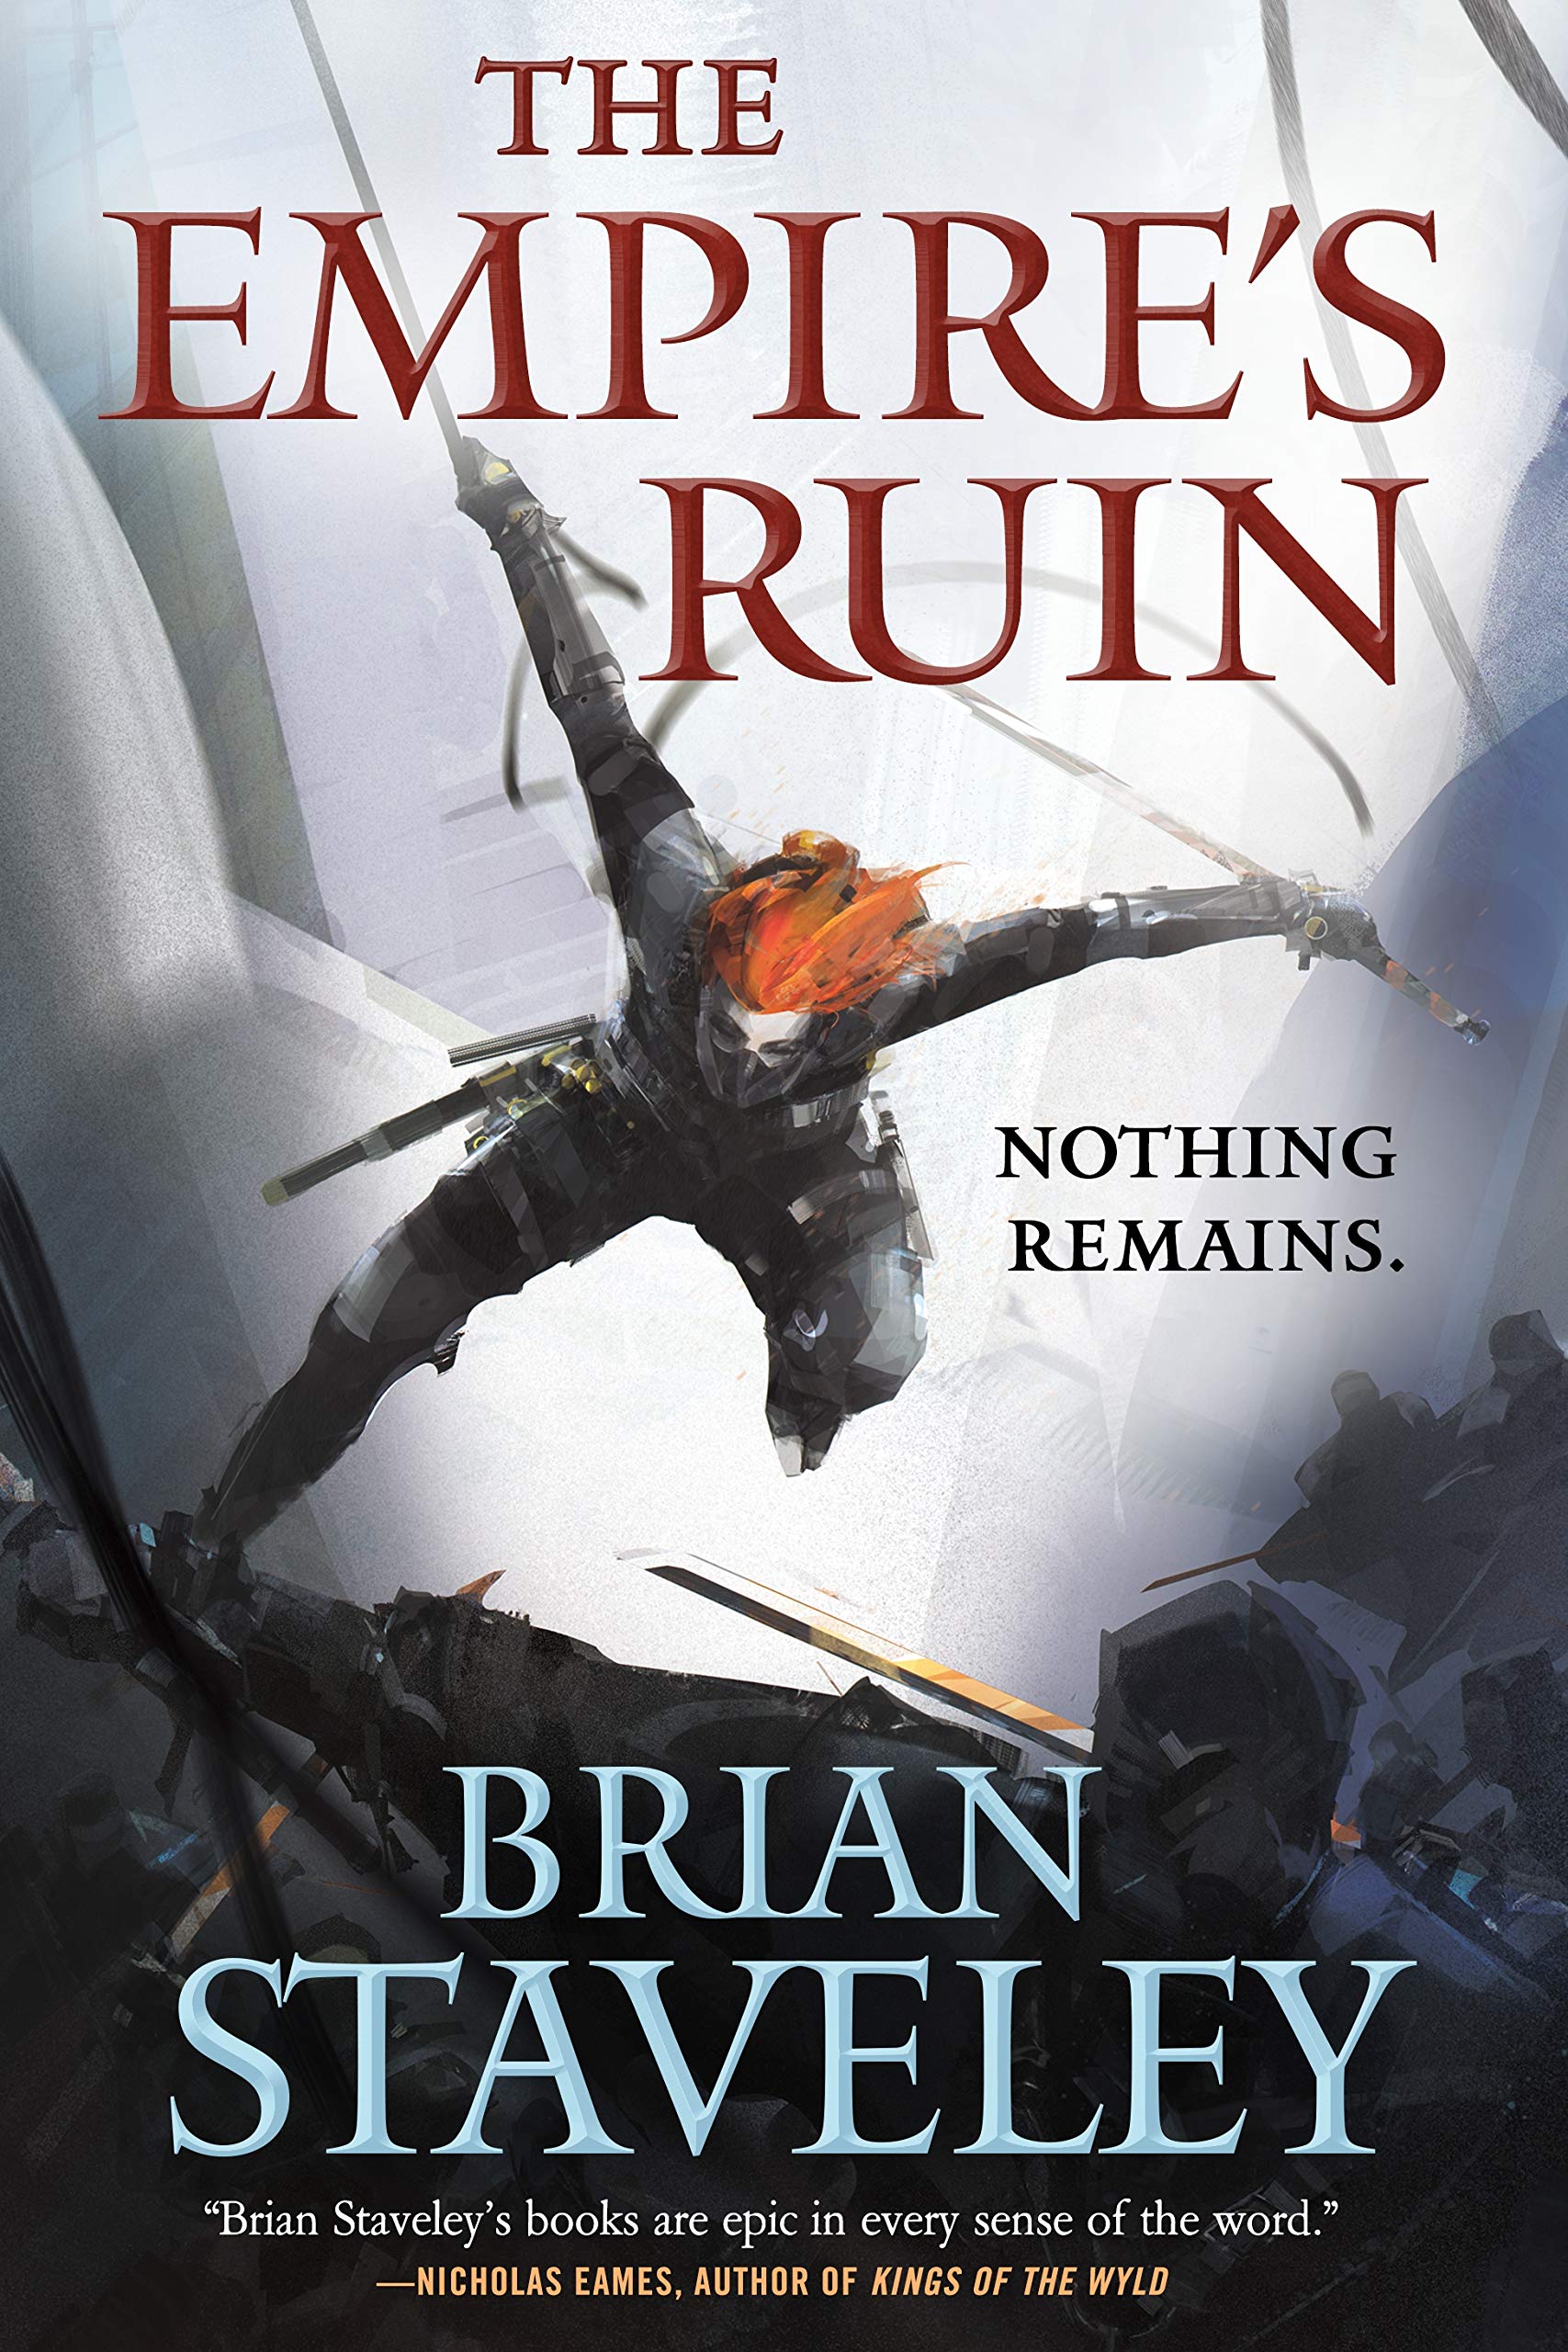 A book cover featuring a person with red hair, wielding two swords, leaping into action